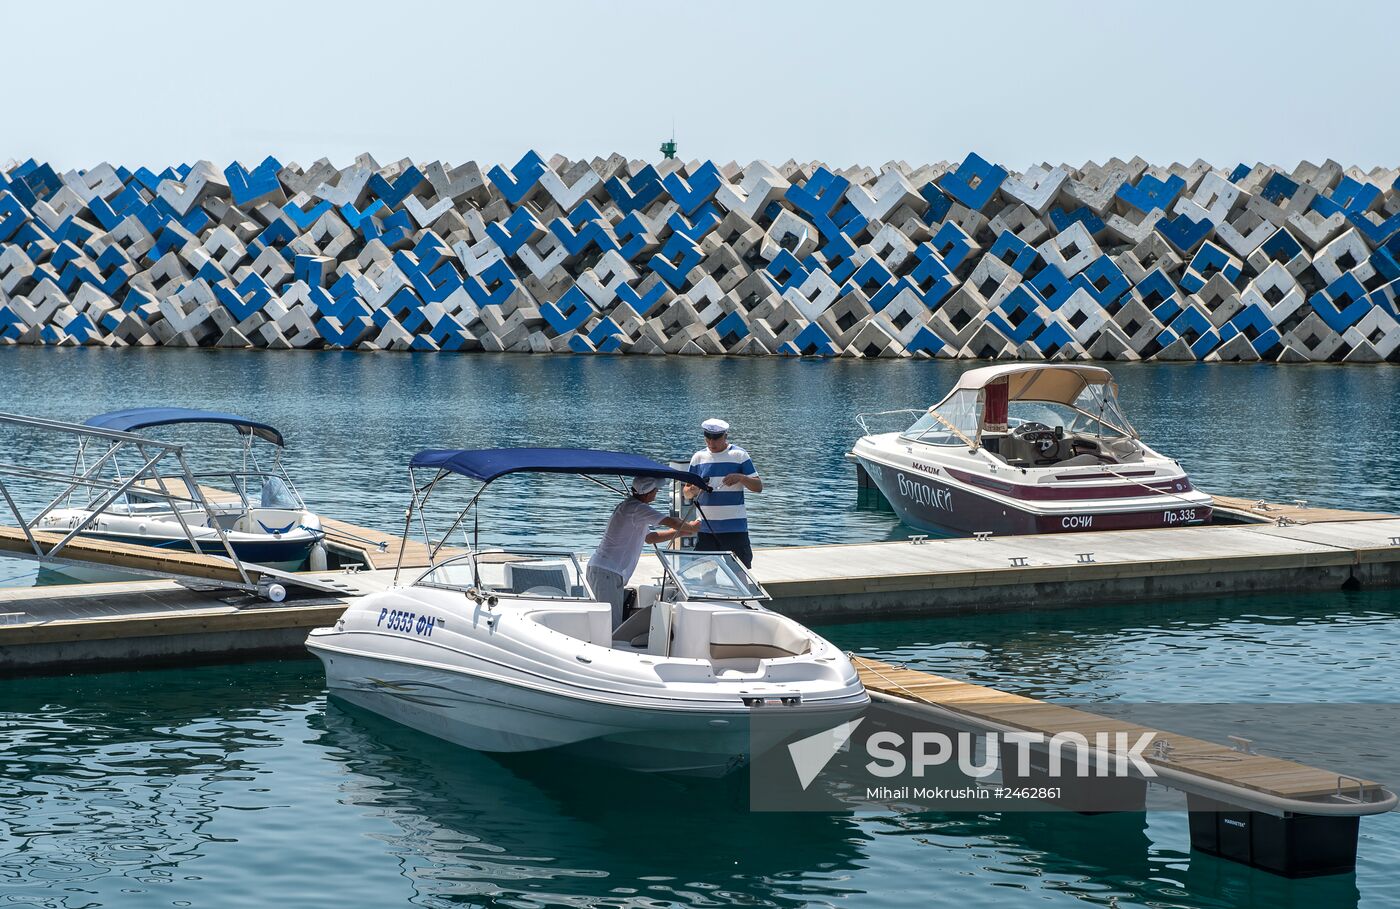 Yacht marina opens in the Imereti Seaport in Sochi